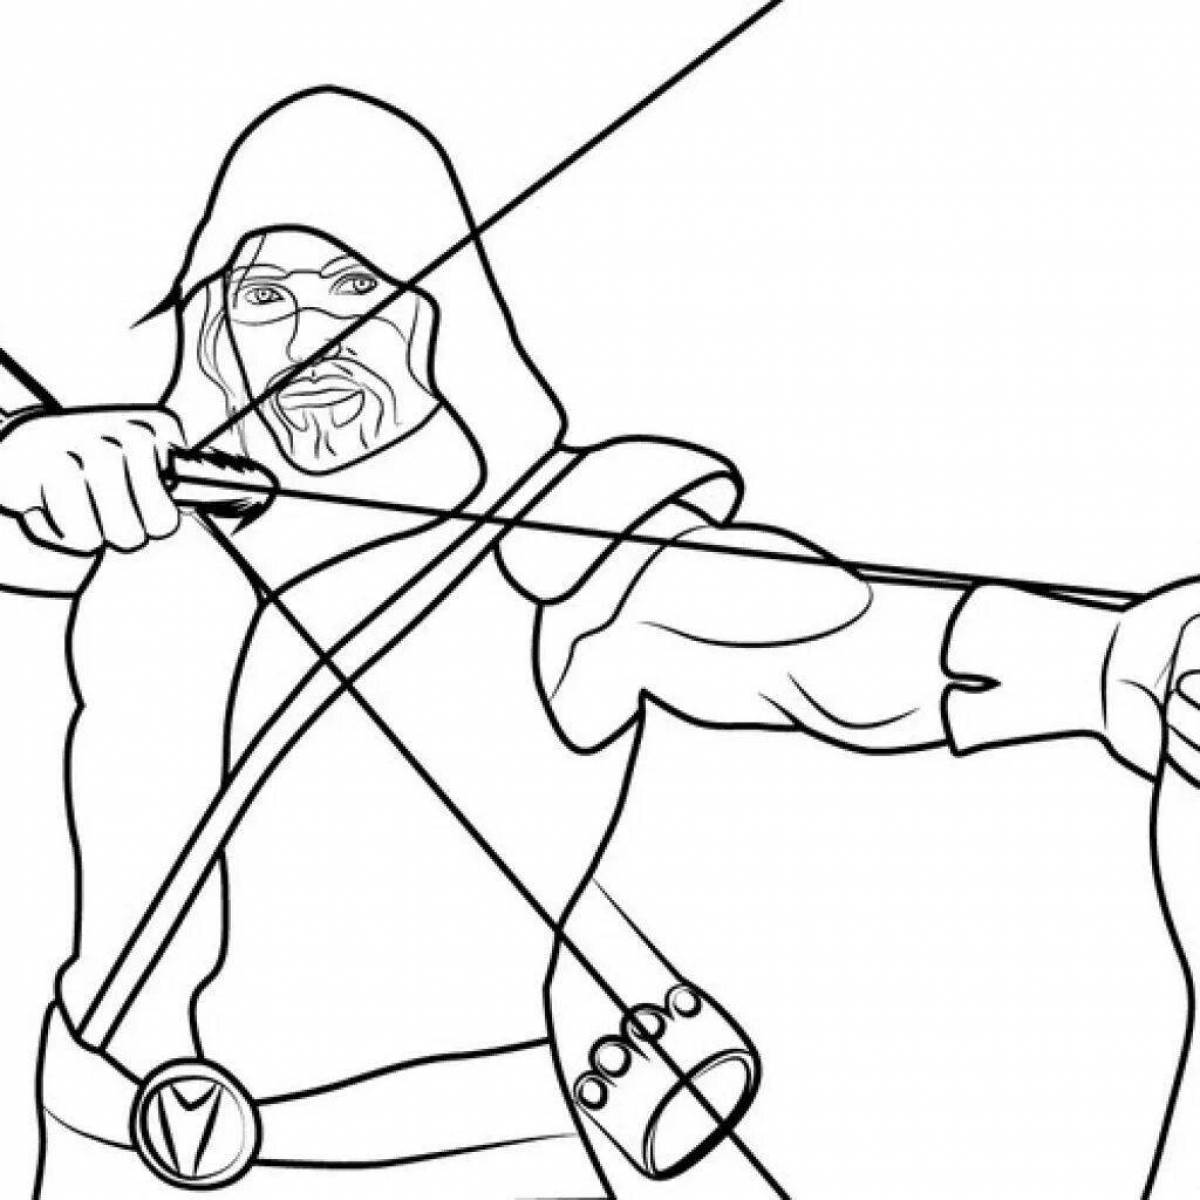 Coloring book shining bow and arrow